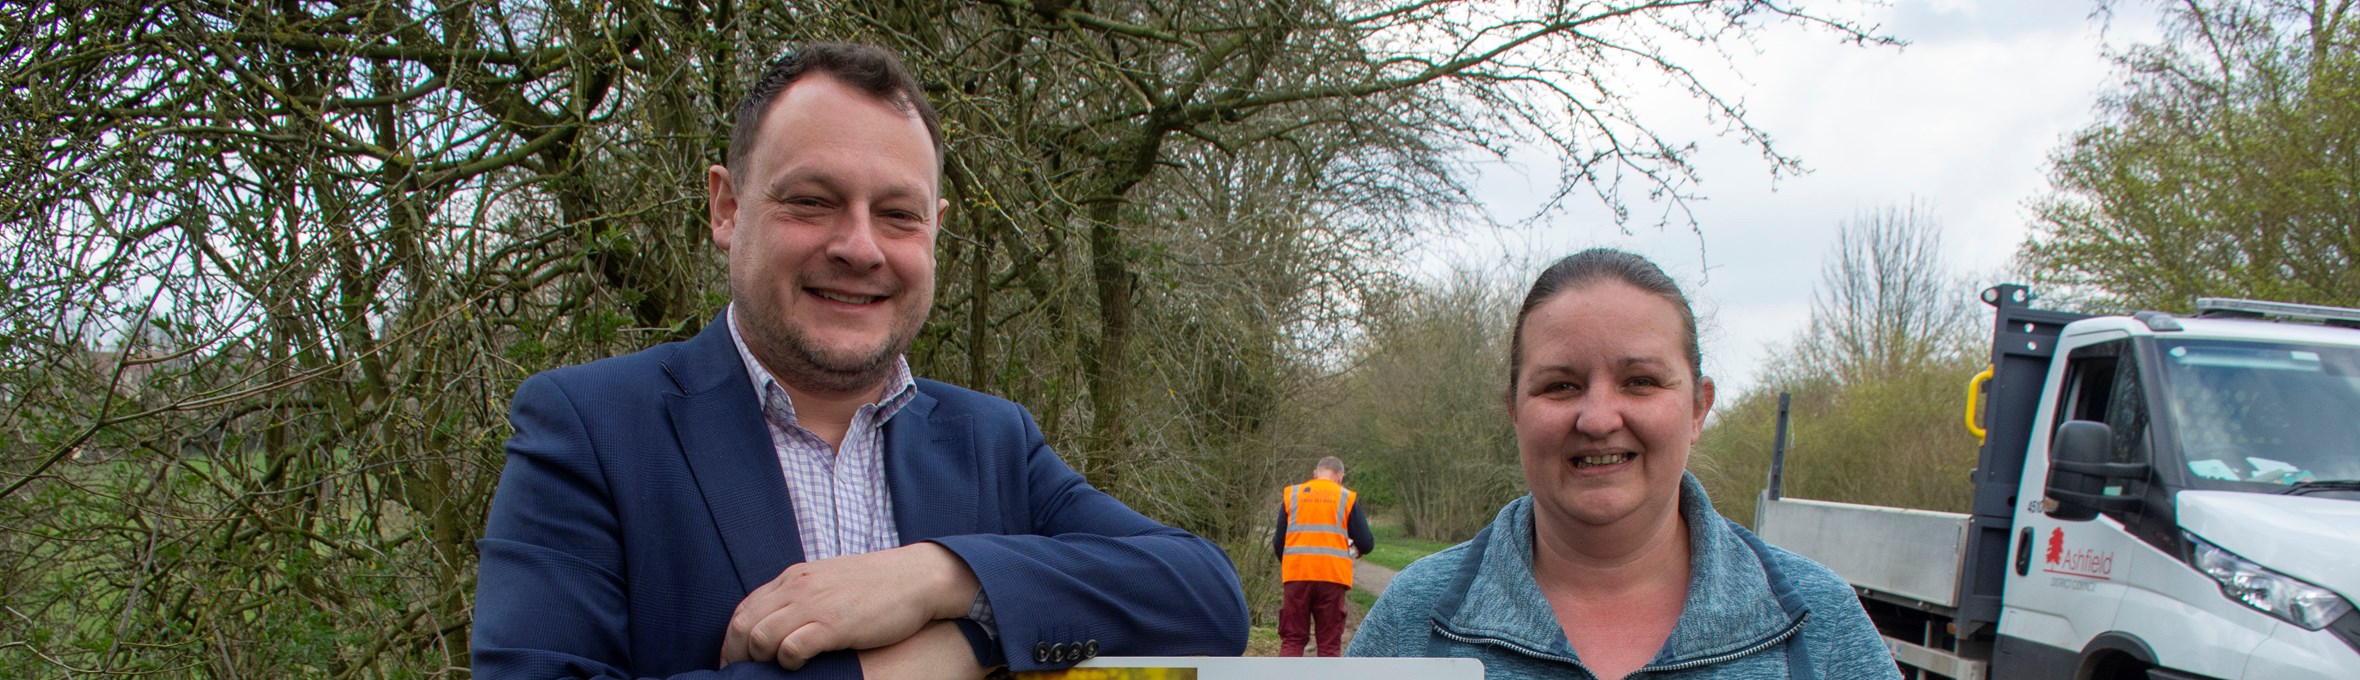 Cllr Jason Zadrozny and Cllr Samantha Deakin at Teversal Trails in Skegby 